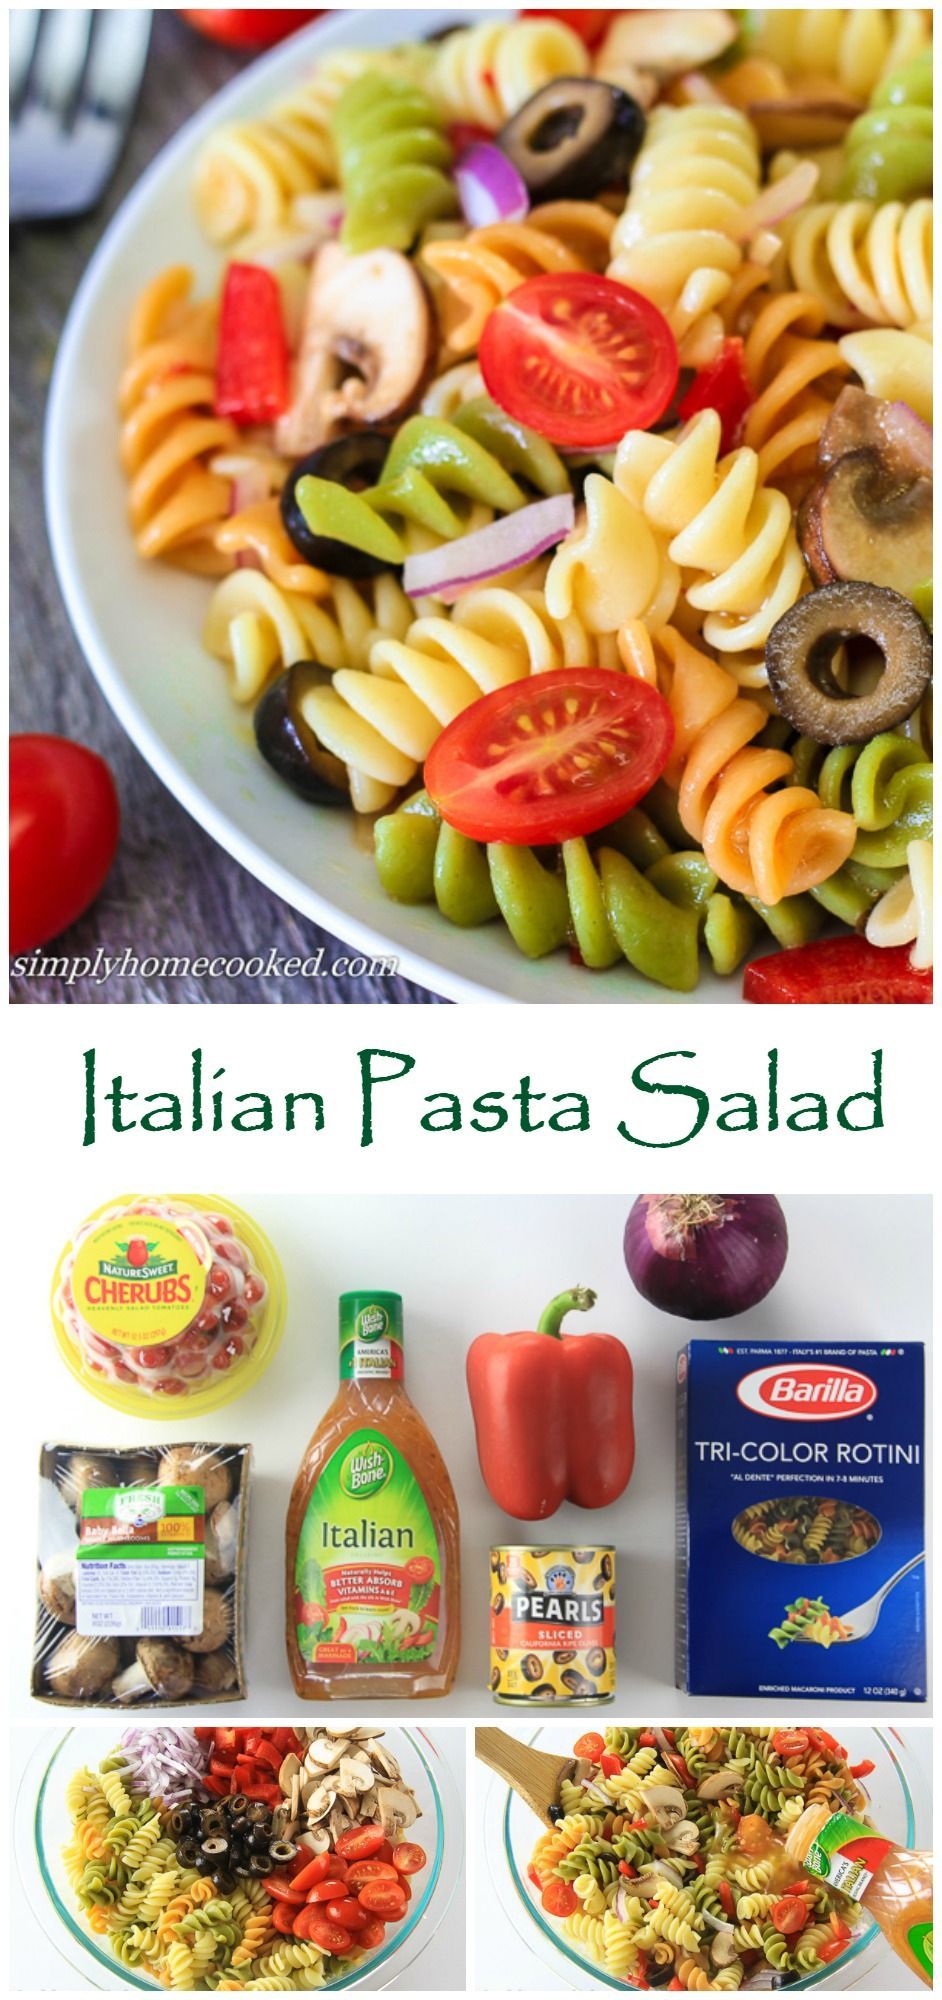 A quick and easy pasta salad made with ingredients you probably already have at home.